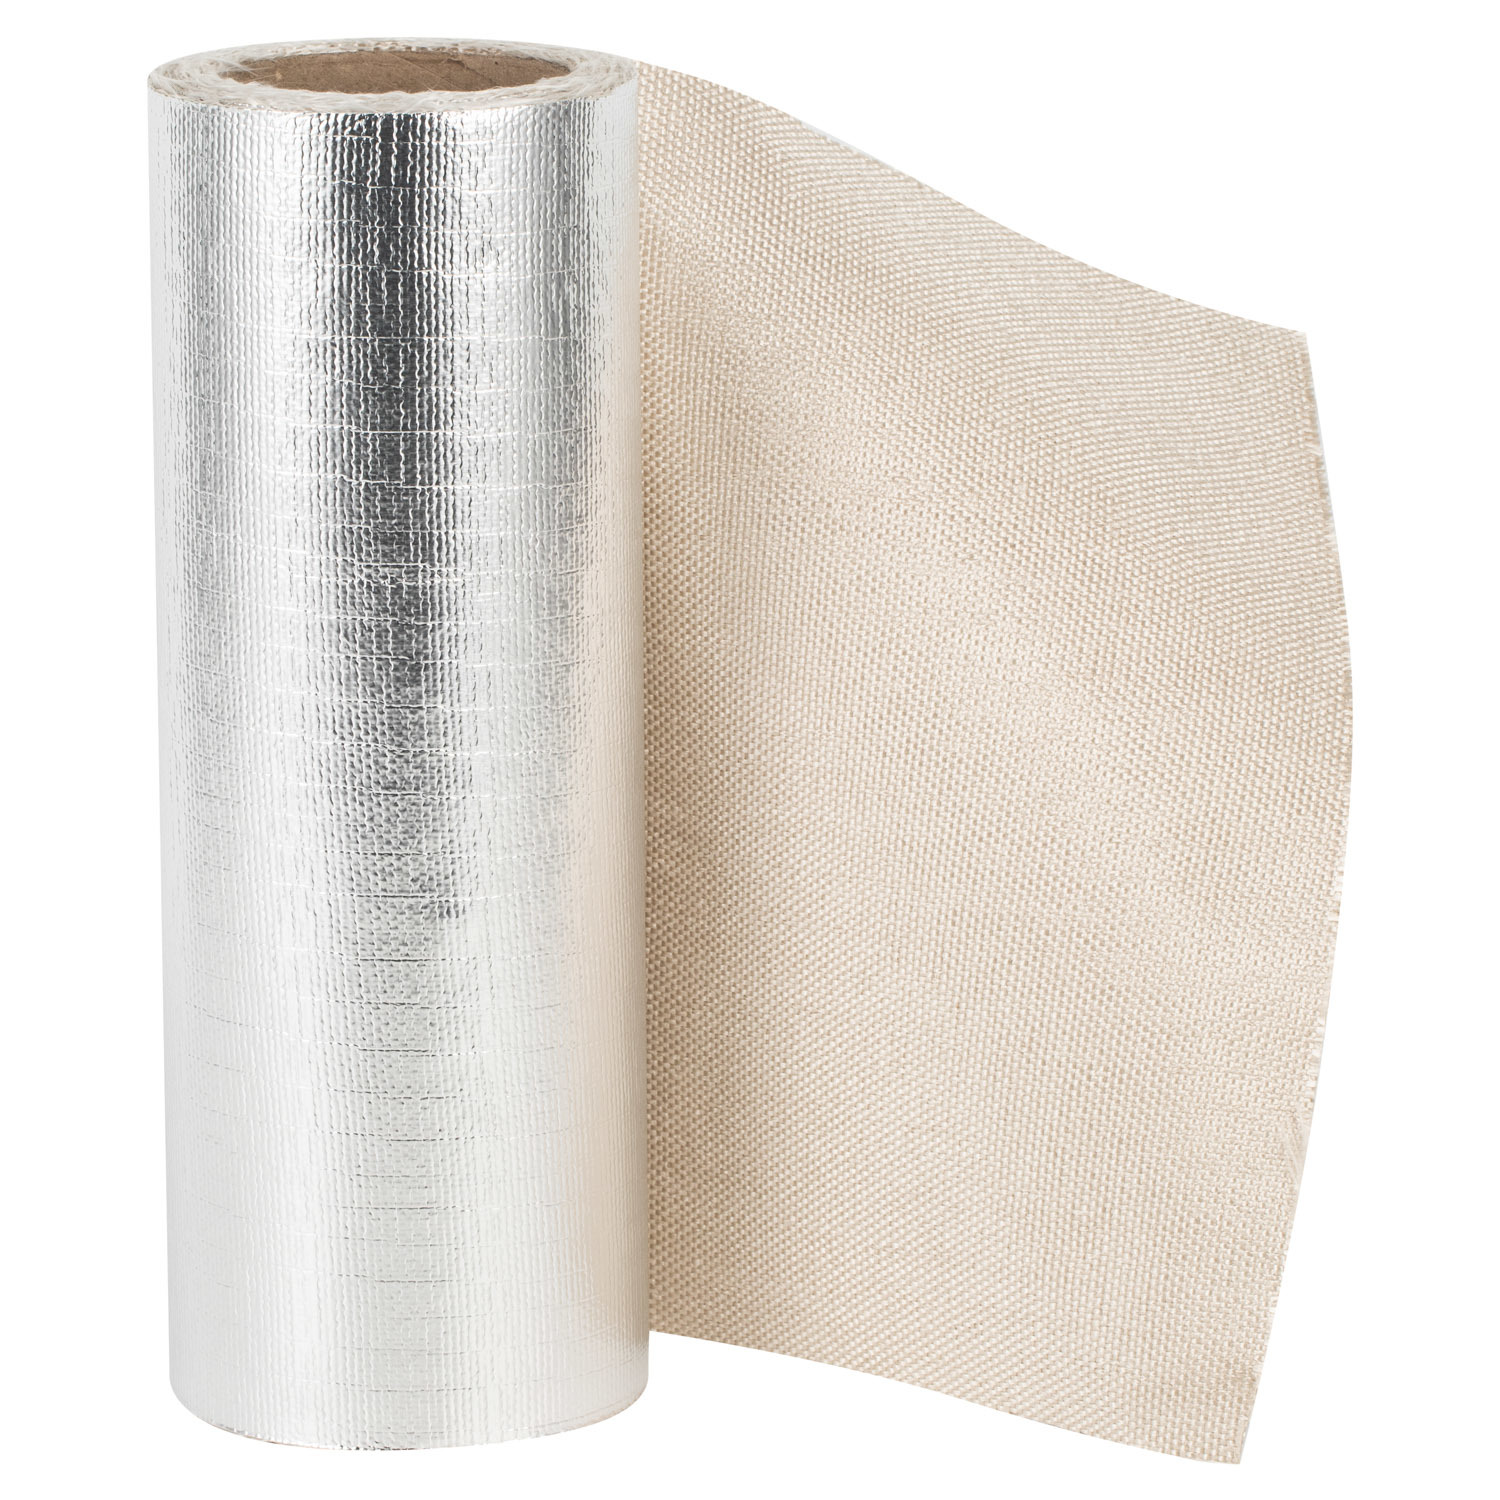 Al-Ht2025 Thermal Insulation And Fireproof Glass Fiber Cloth